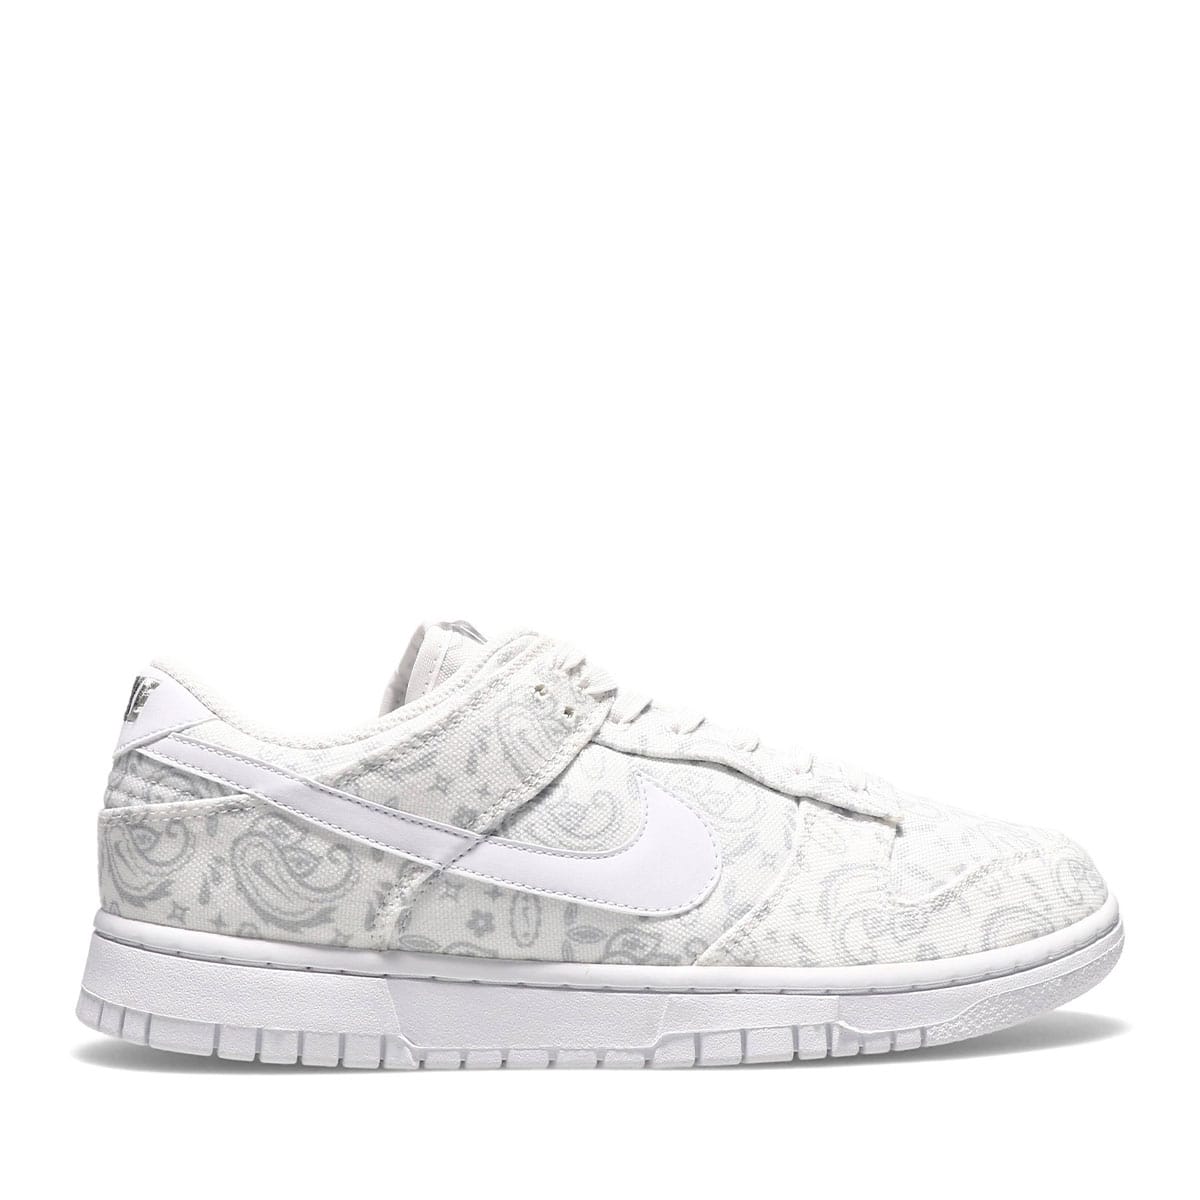 NIKE DUNK LOW Fog風 By you 27.0センチ 新品未使用